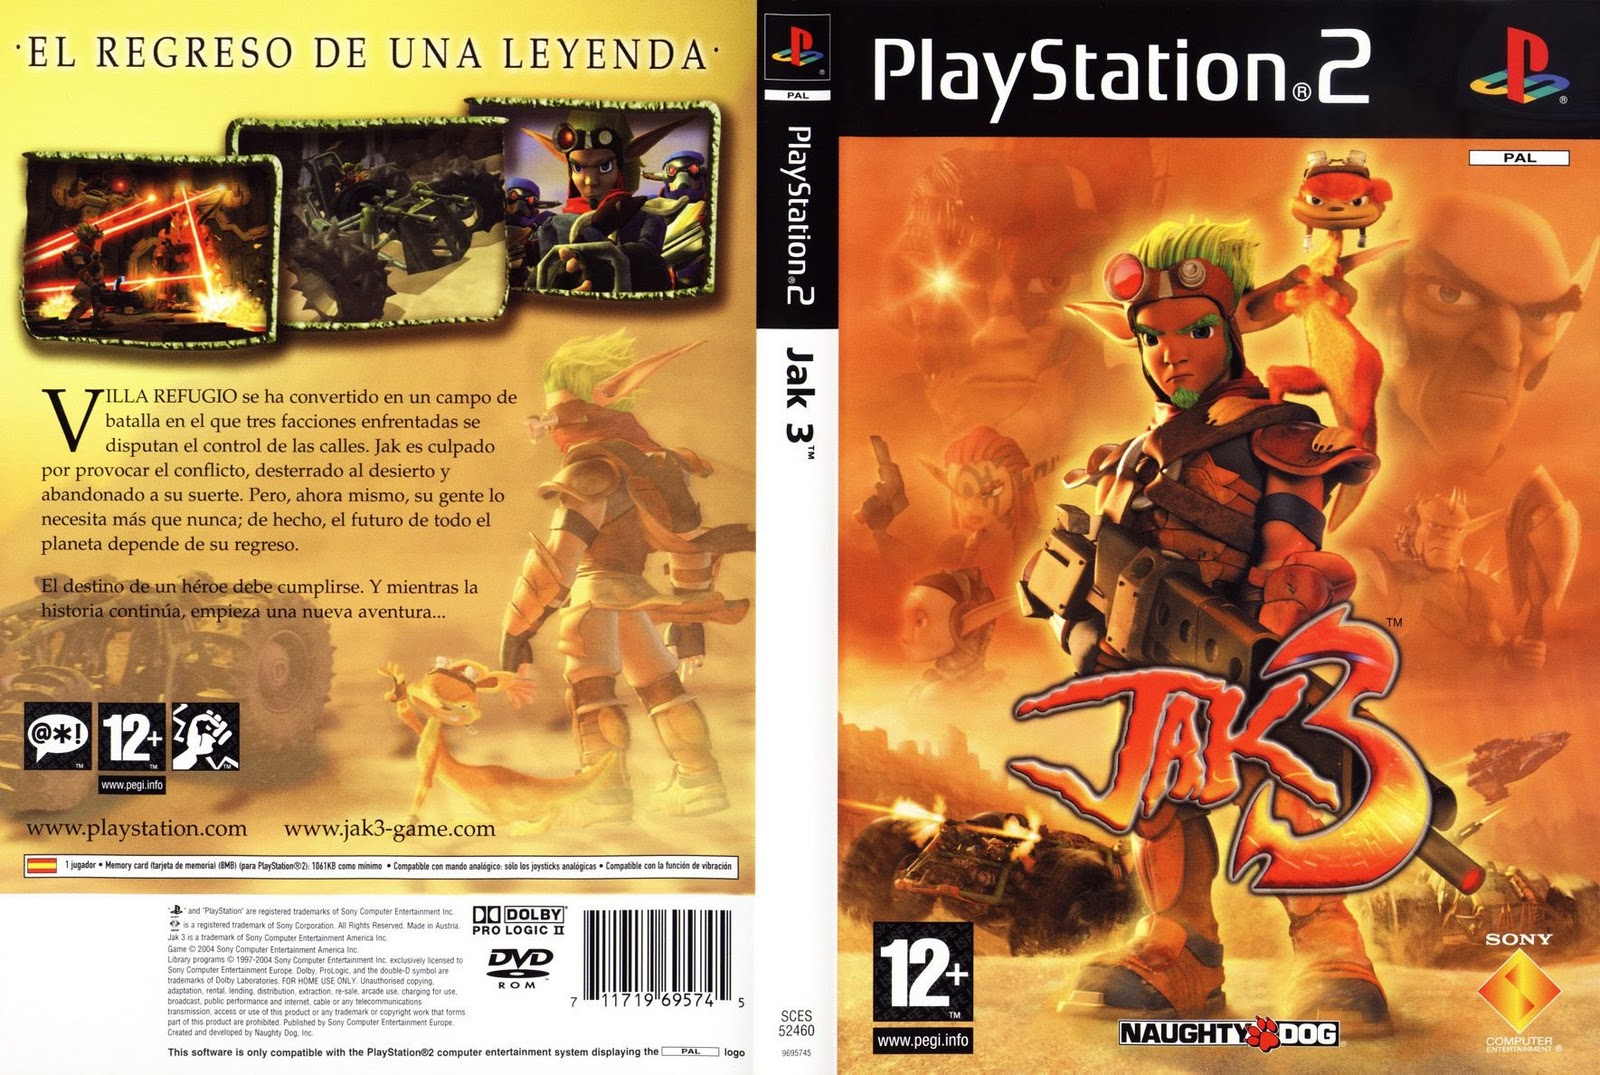 Game jack 2. Sony PLAYSTATION 2 ps2. Jak2 ps2 обложка. Jack 3 игра ps2. Обложка Jack 3 ps2.